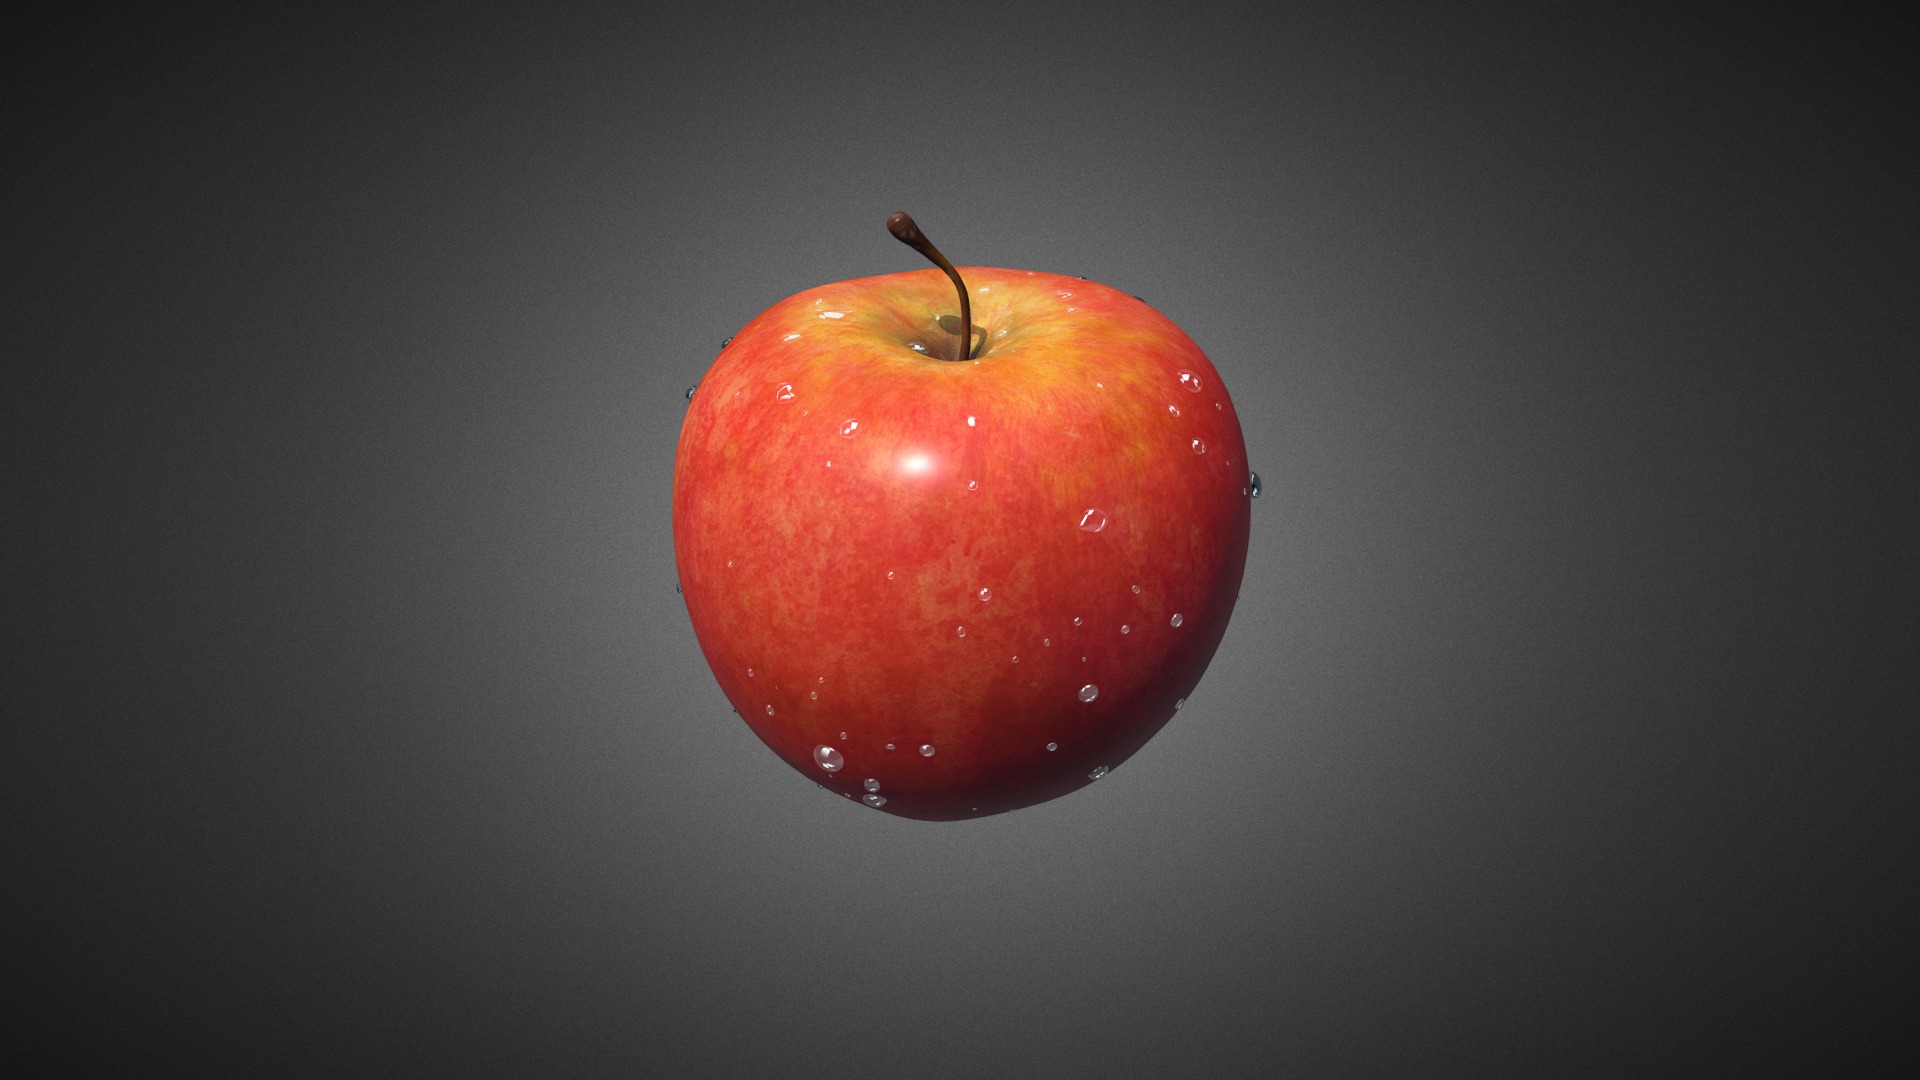 3D model Red Apple - This is a 3D model of the Red Apple. The 3D model is about a red apple with a stem.